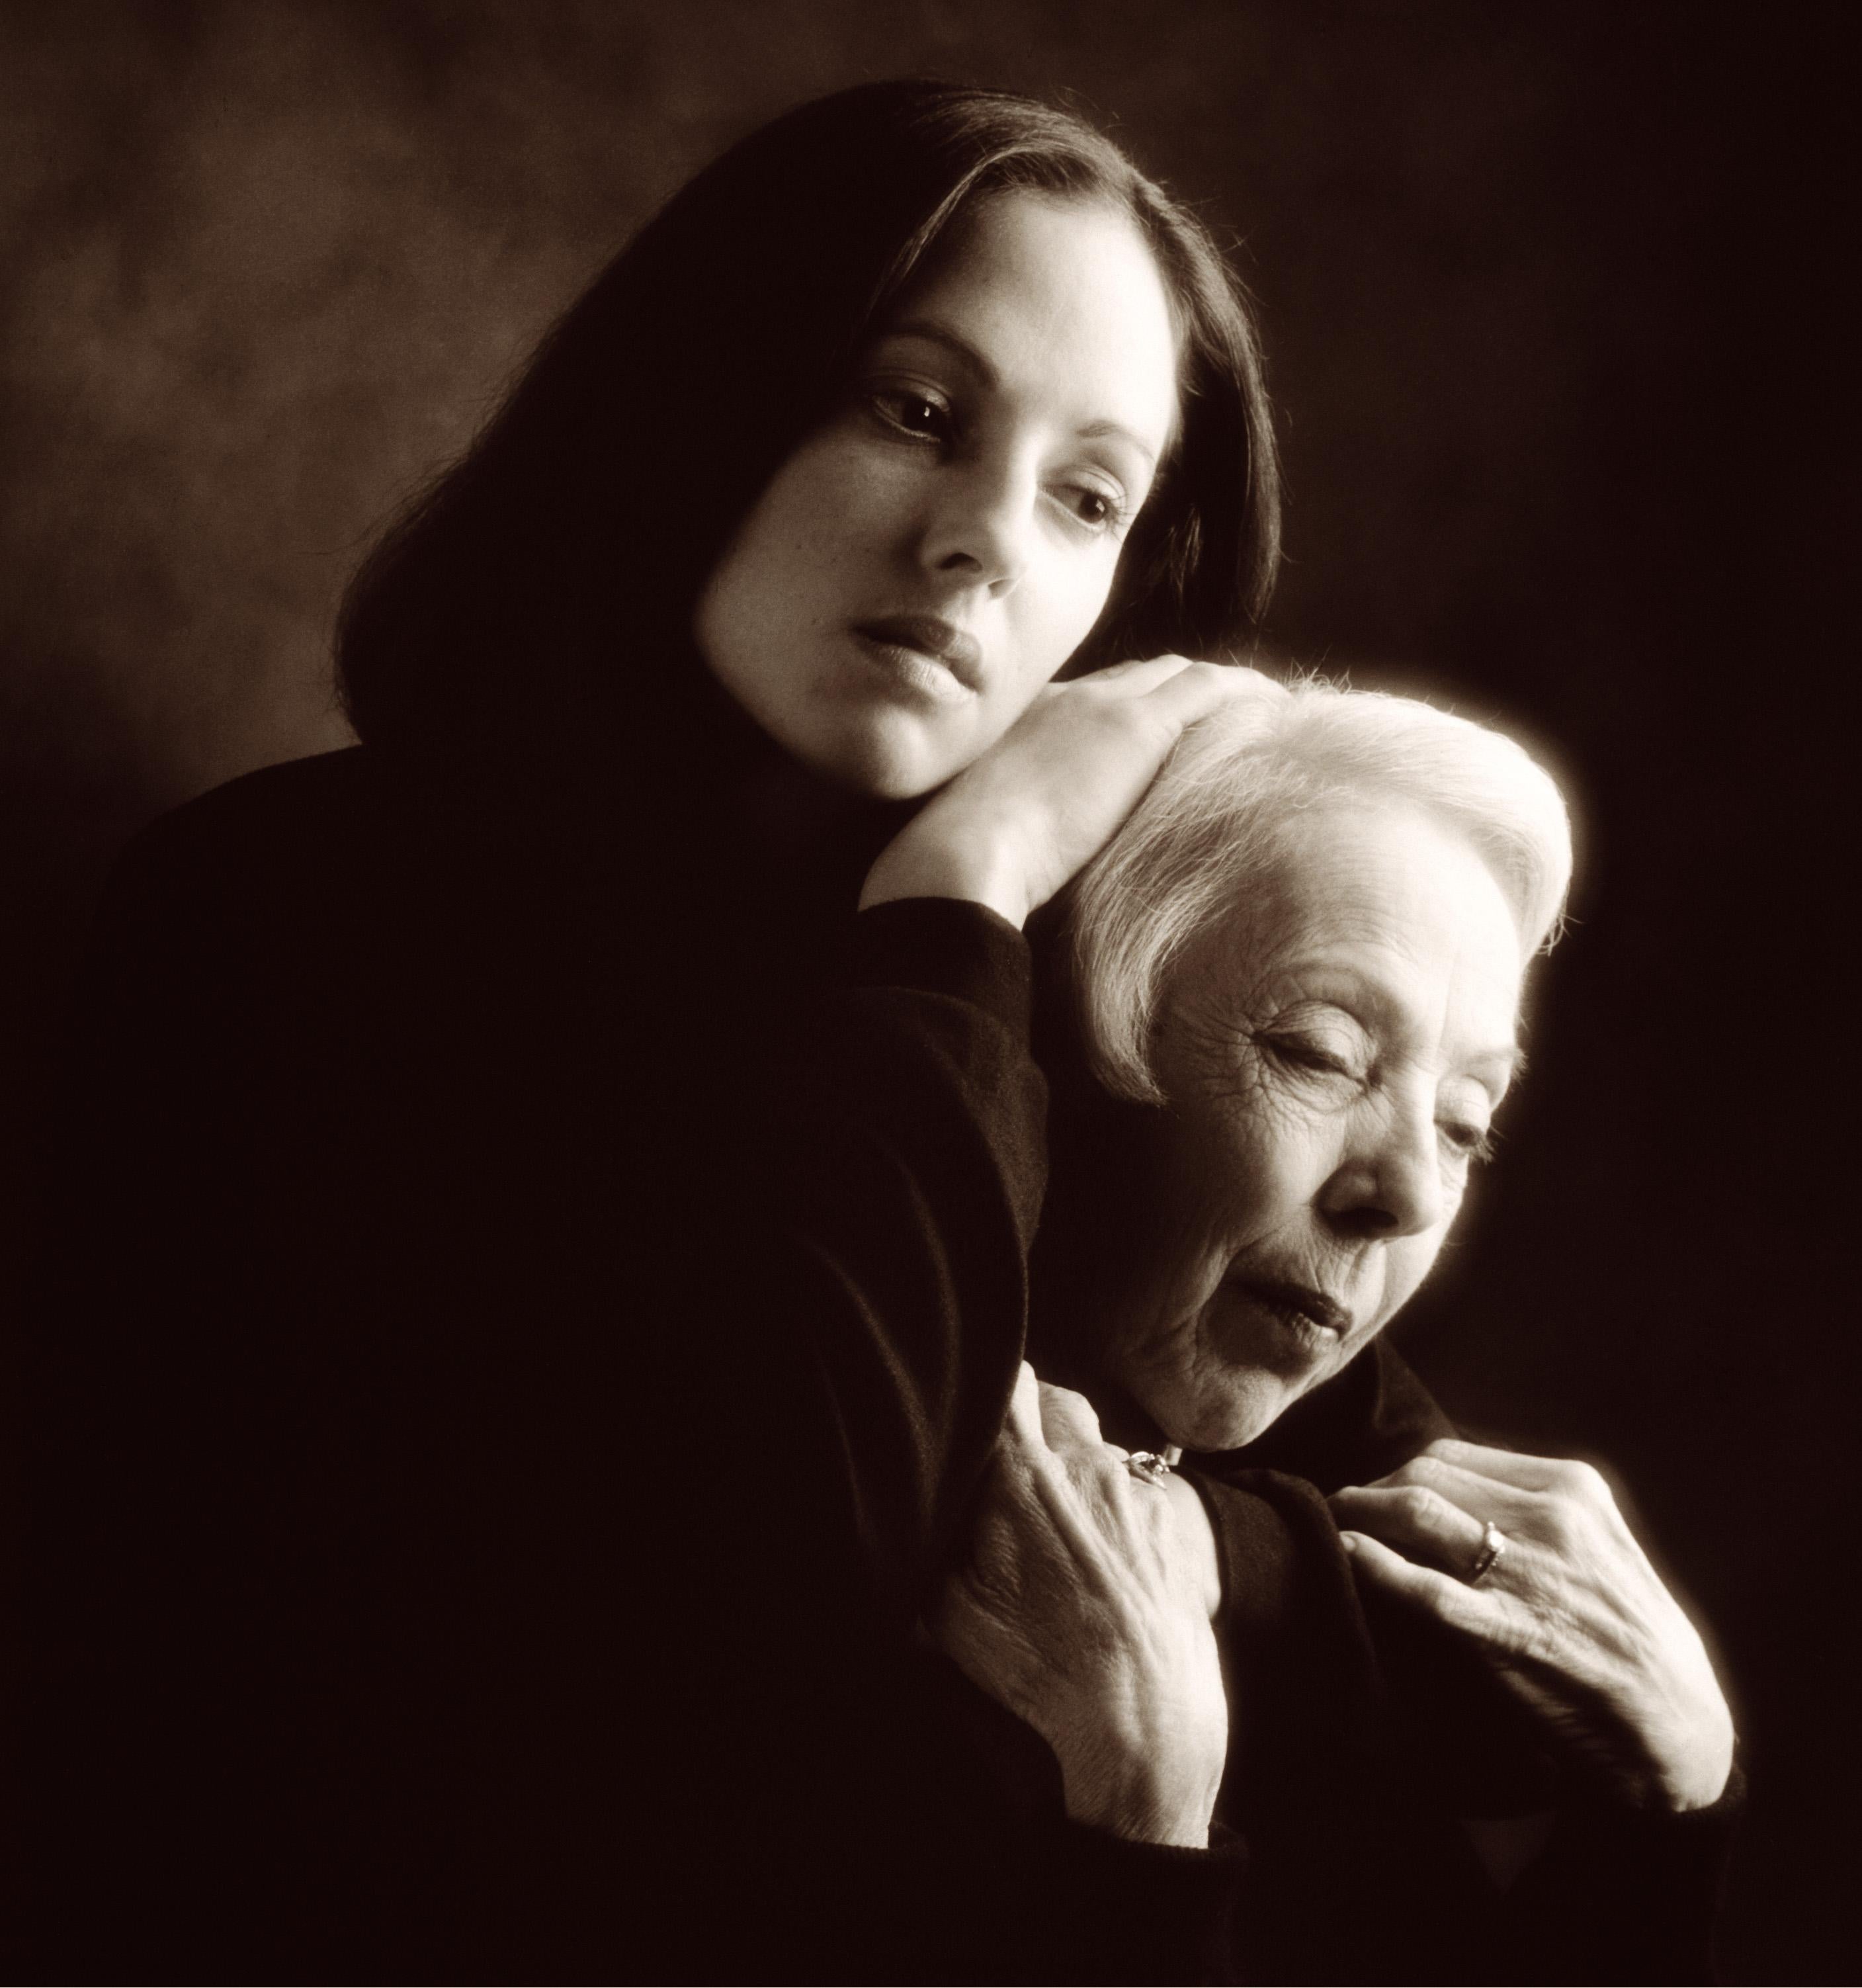 Mother Daughter - Photograph by Nick Vedros